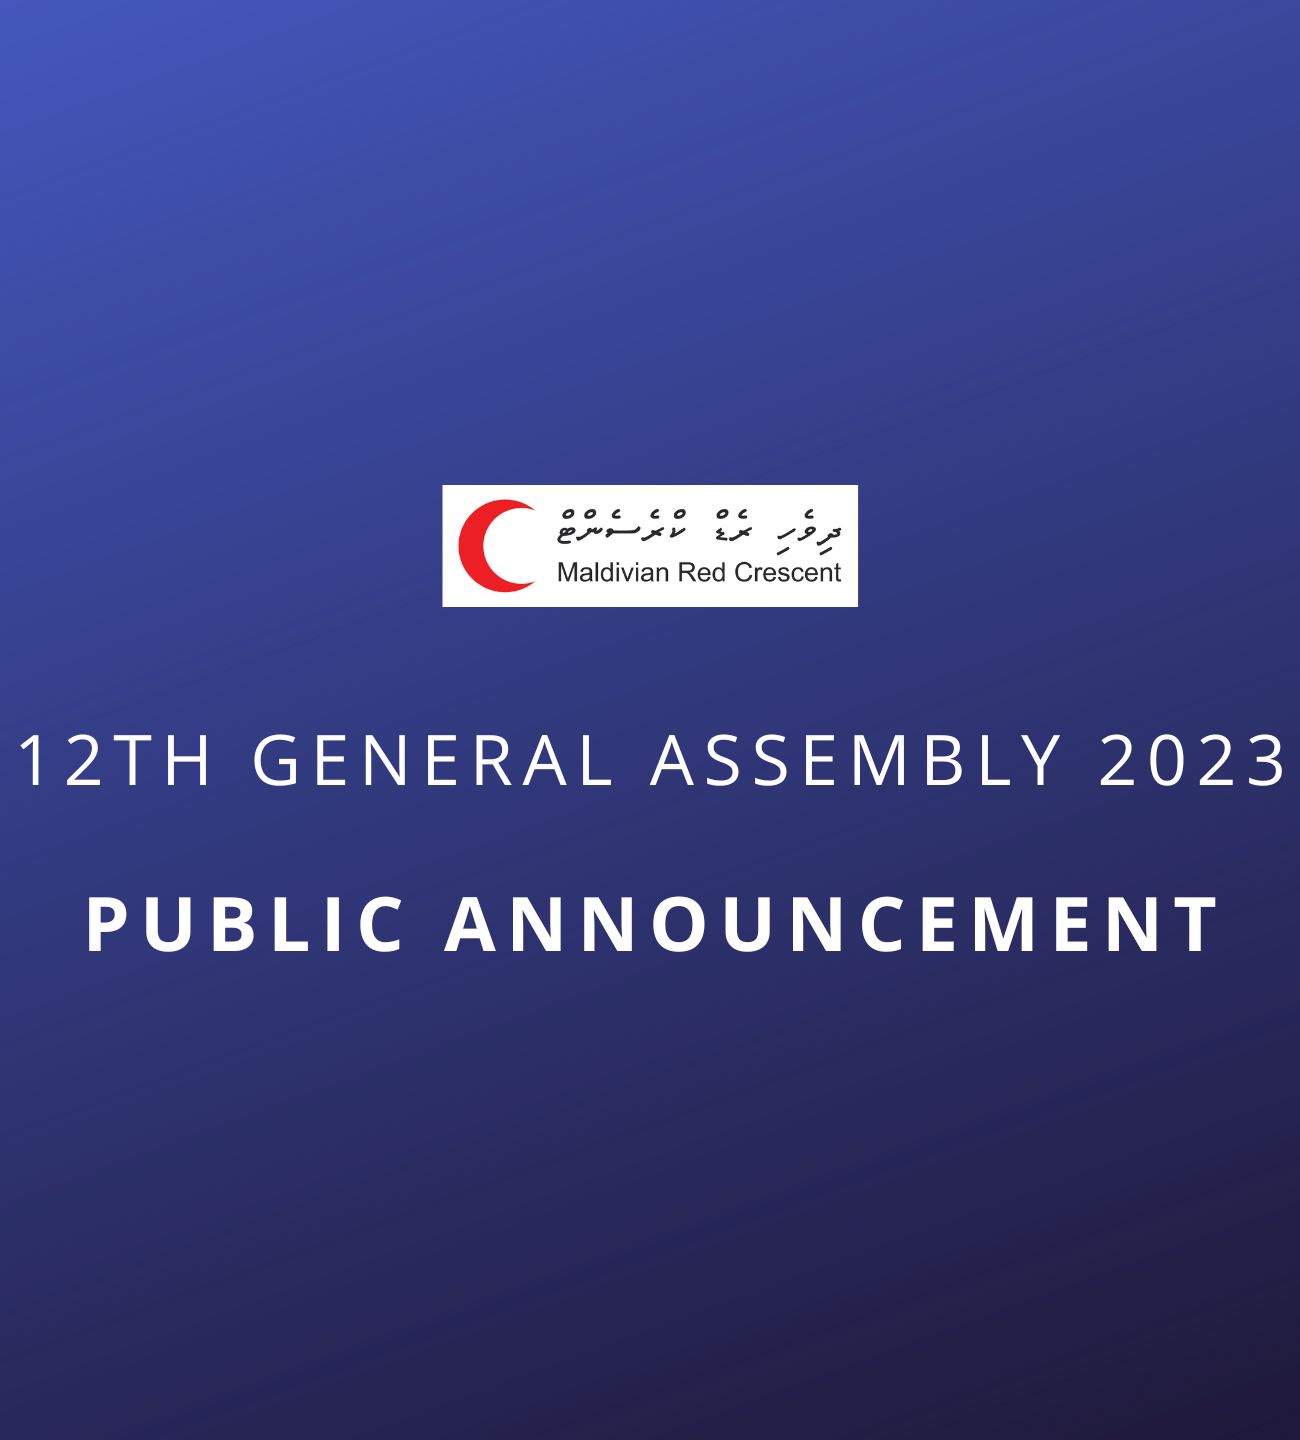 Image of Public Announcement - 12th General Assembly, Maldivian Red Crescent